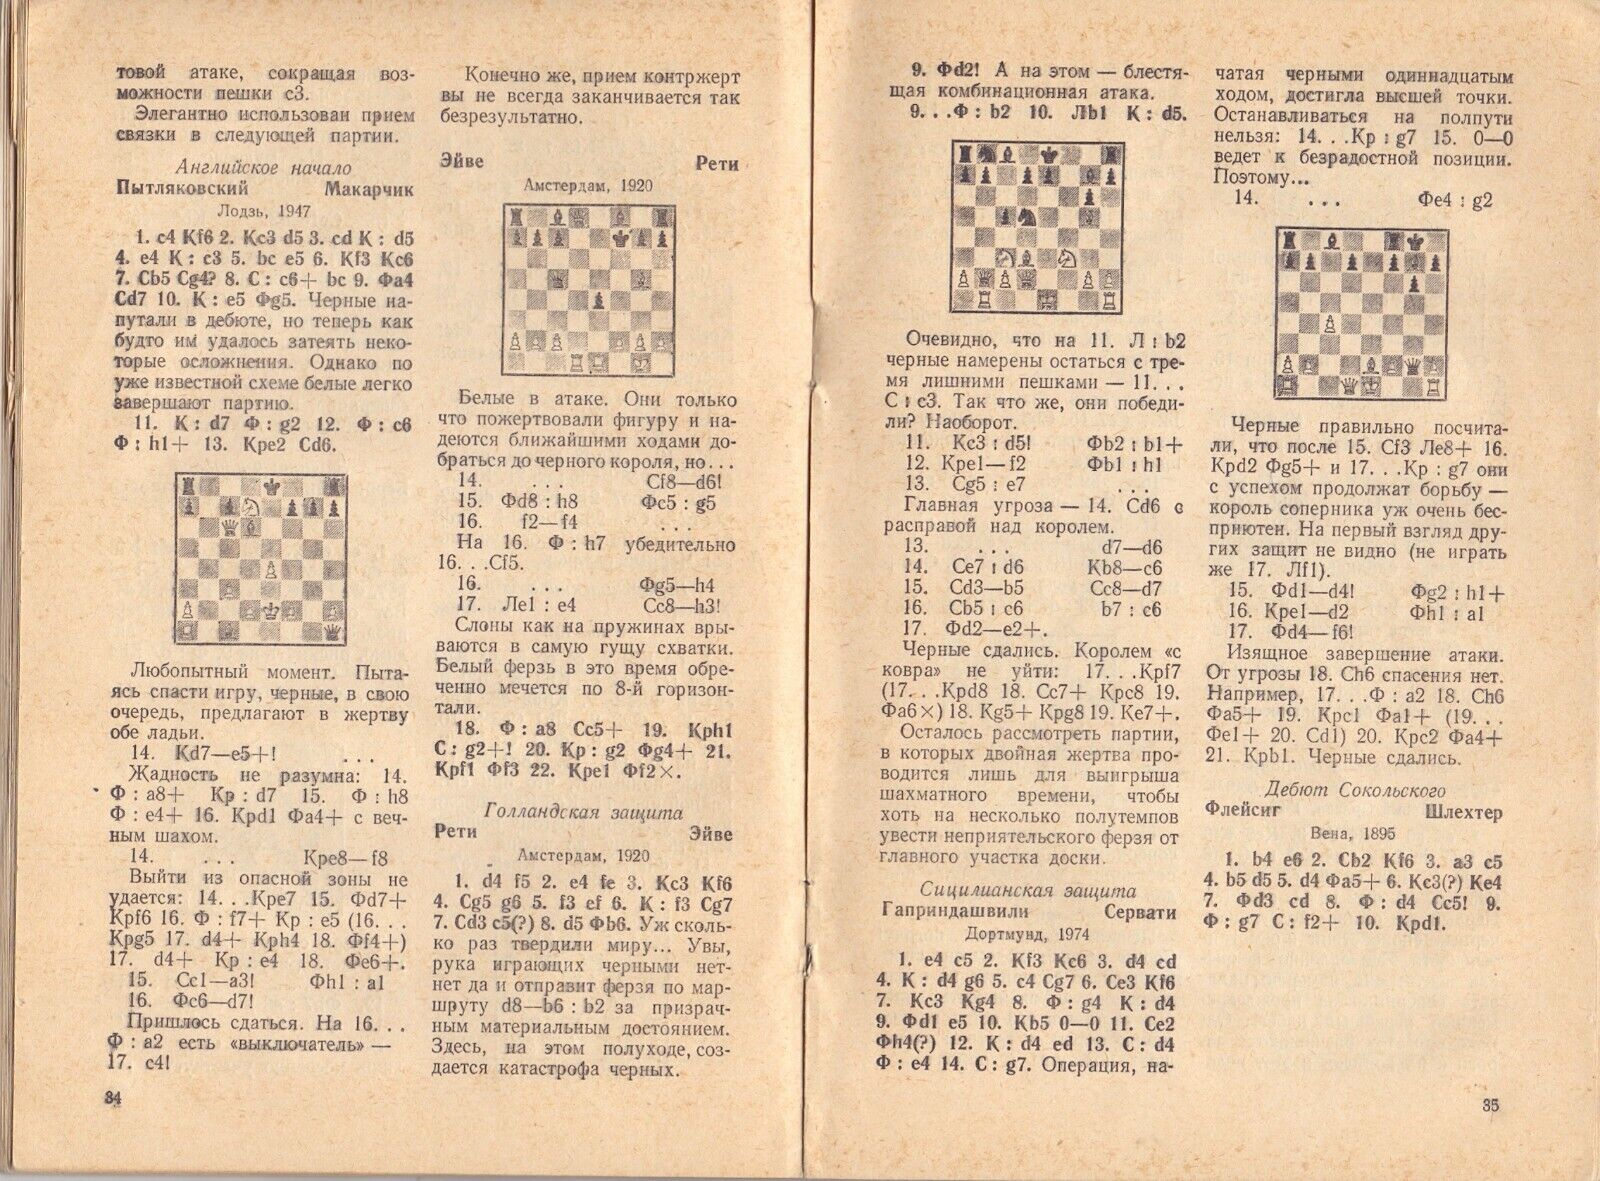 11723.Soviet Chess Brochure: Matsukevich. Limitation principle. Signed by author 1982